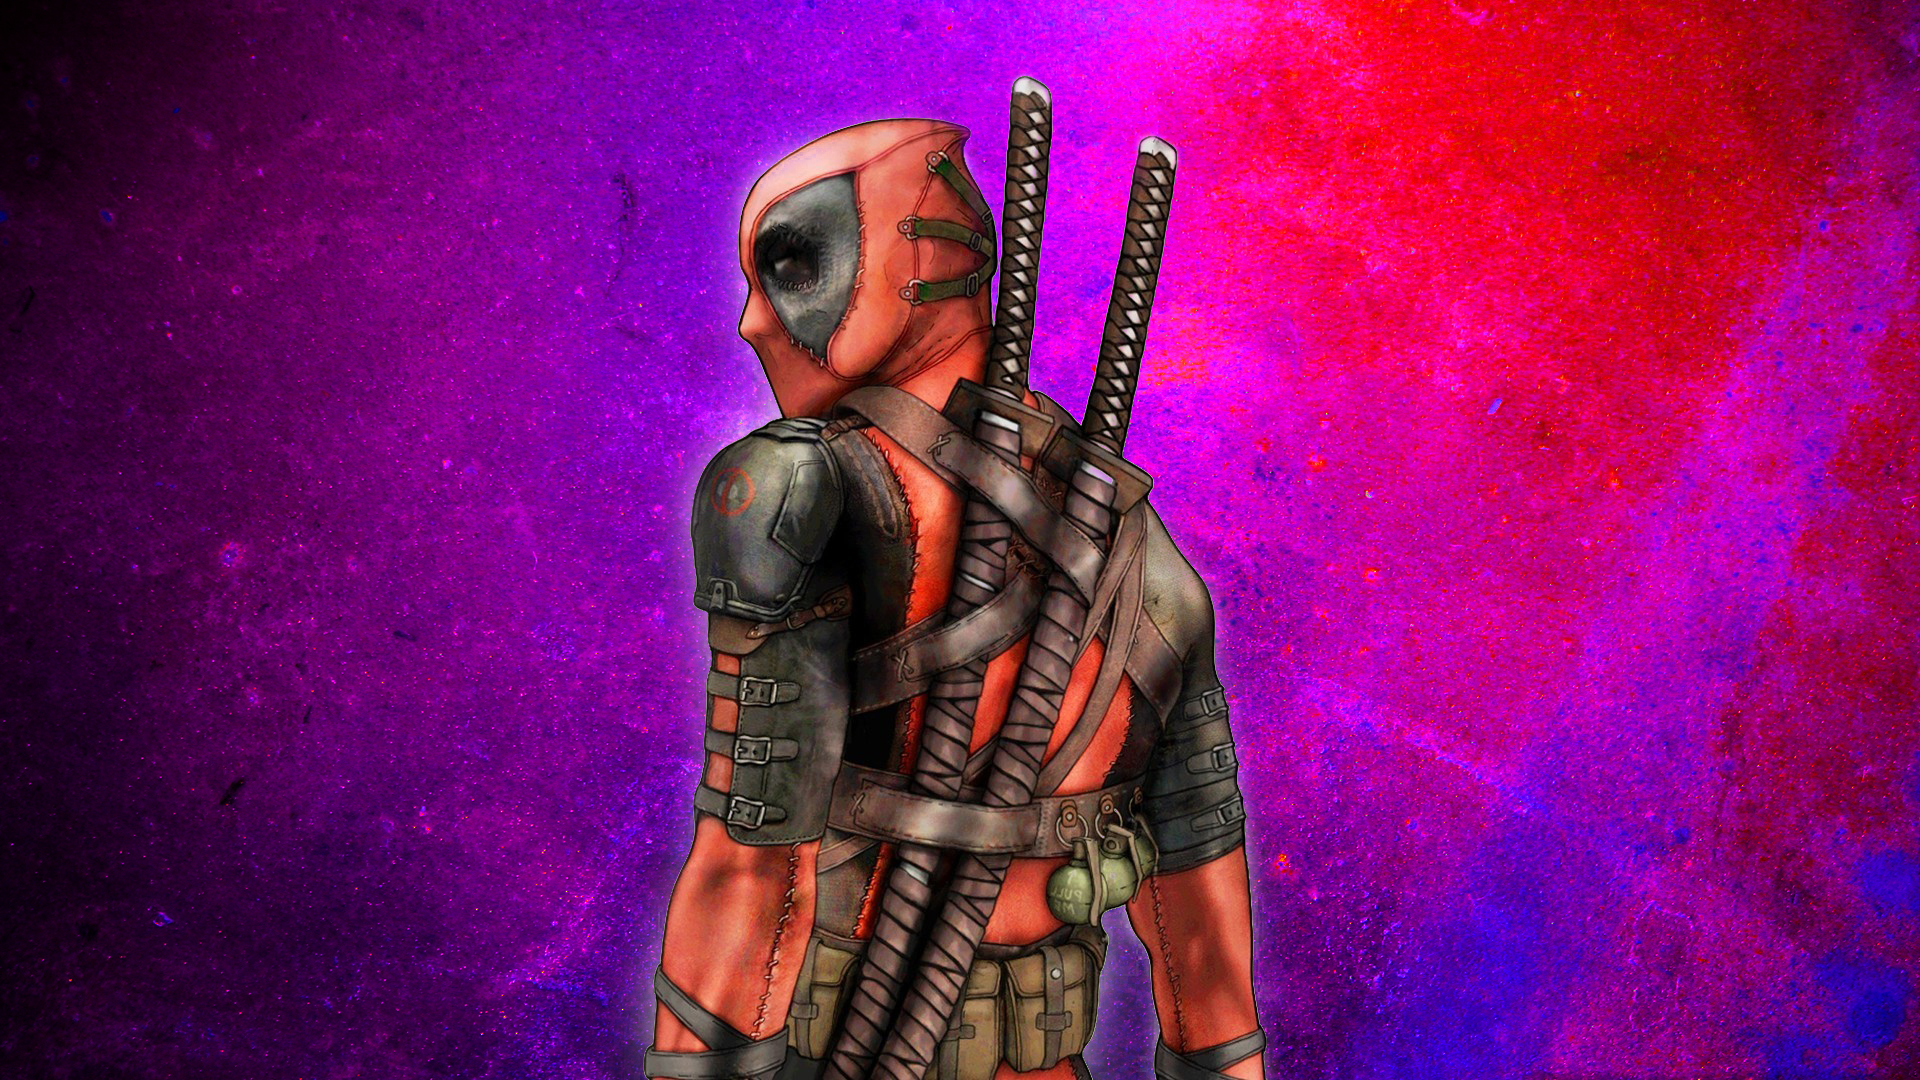 760+ Deadpool HD Wallpapers and Backgrounds